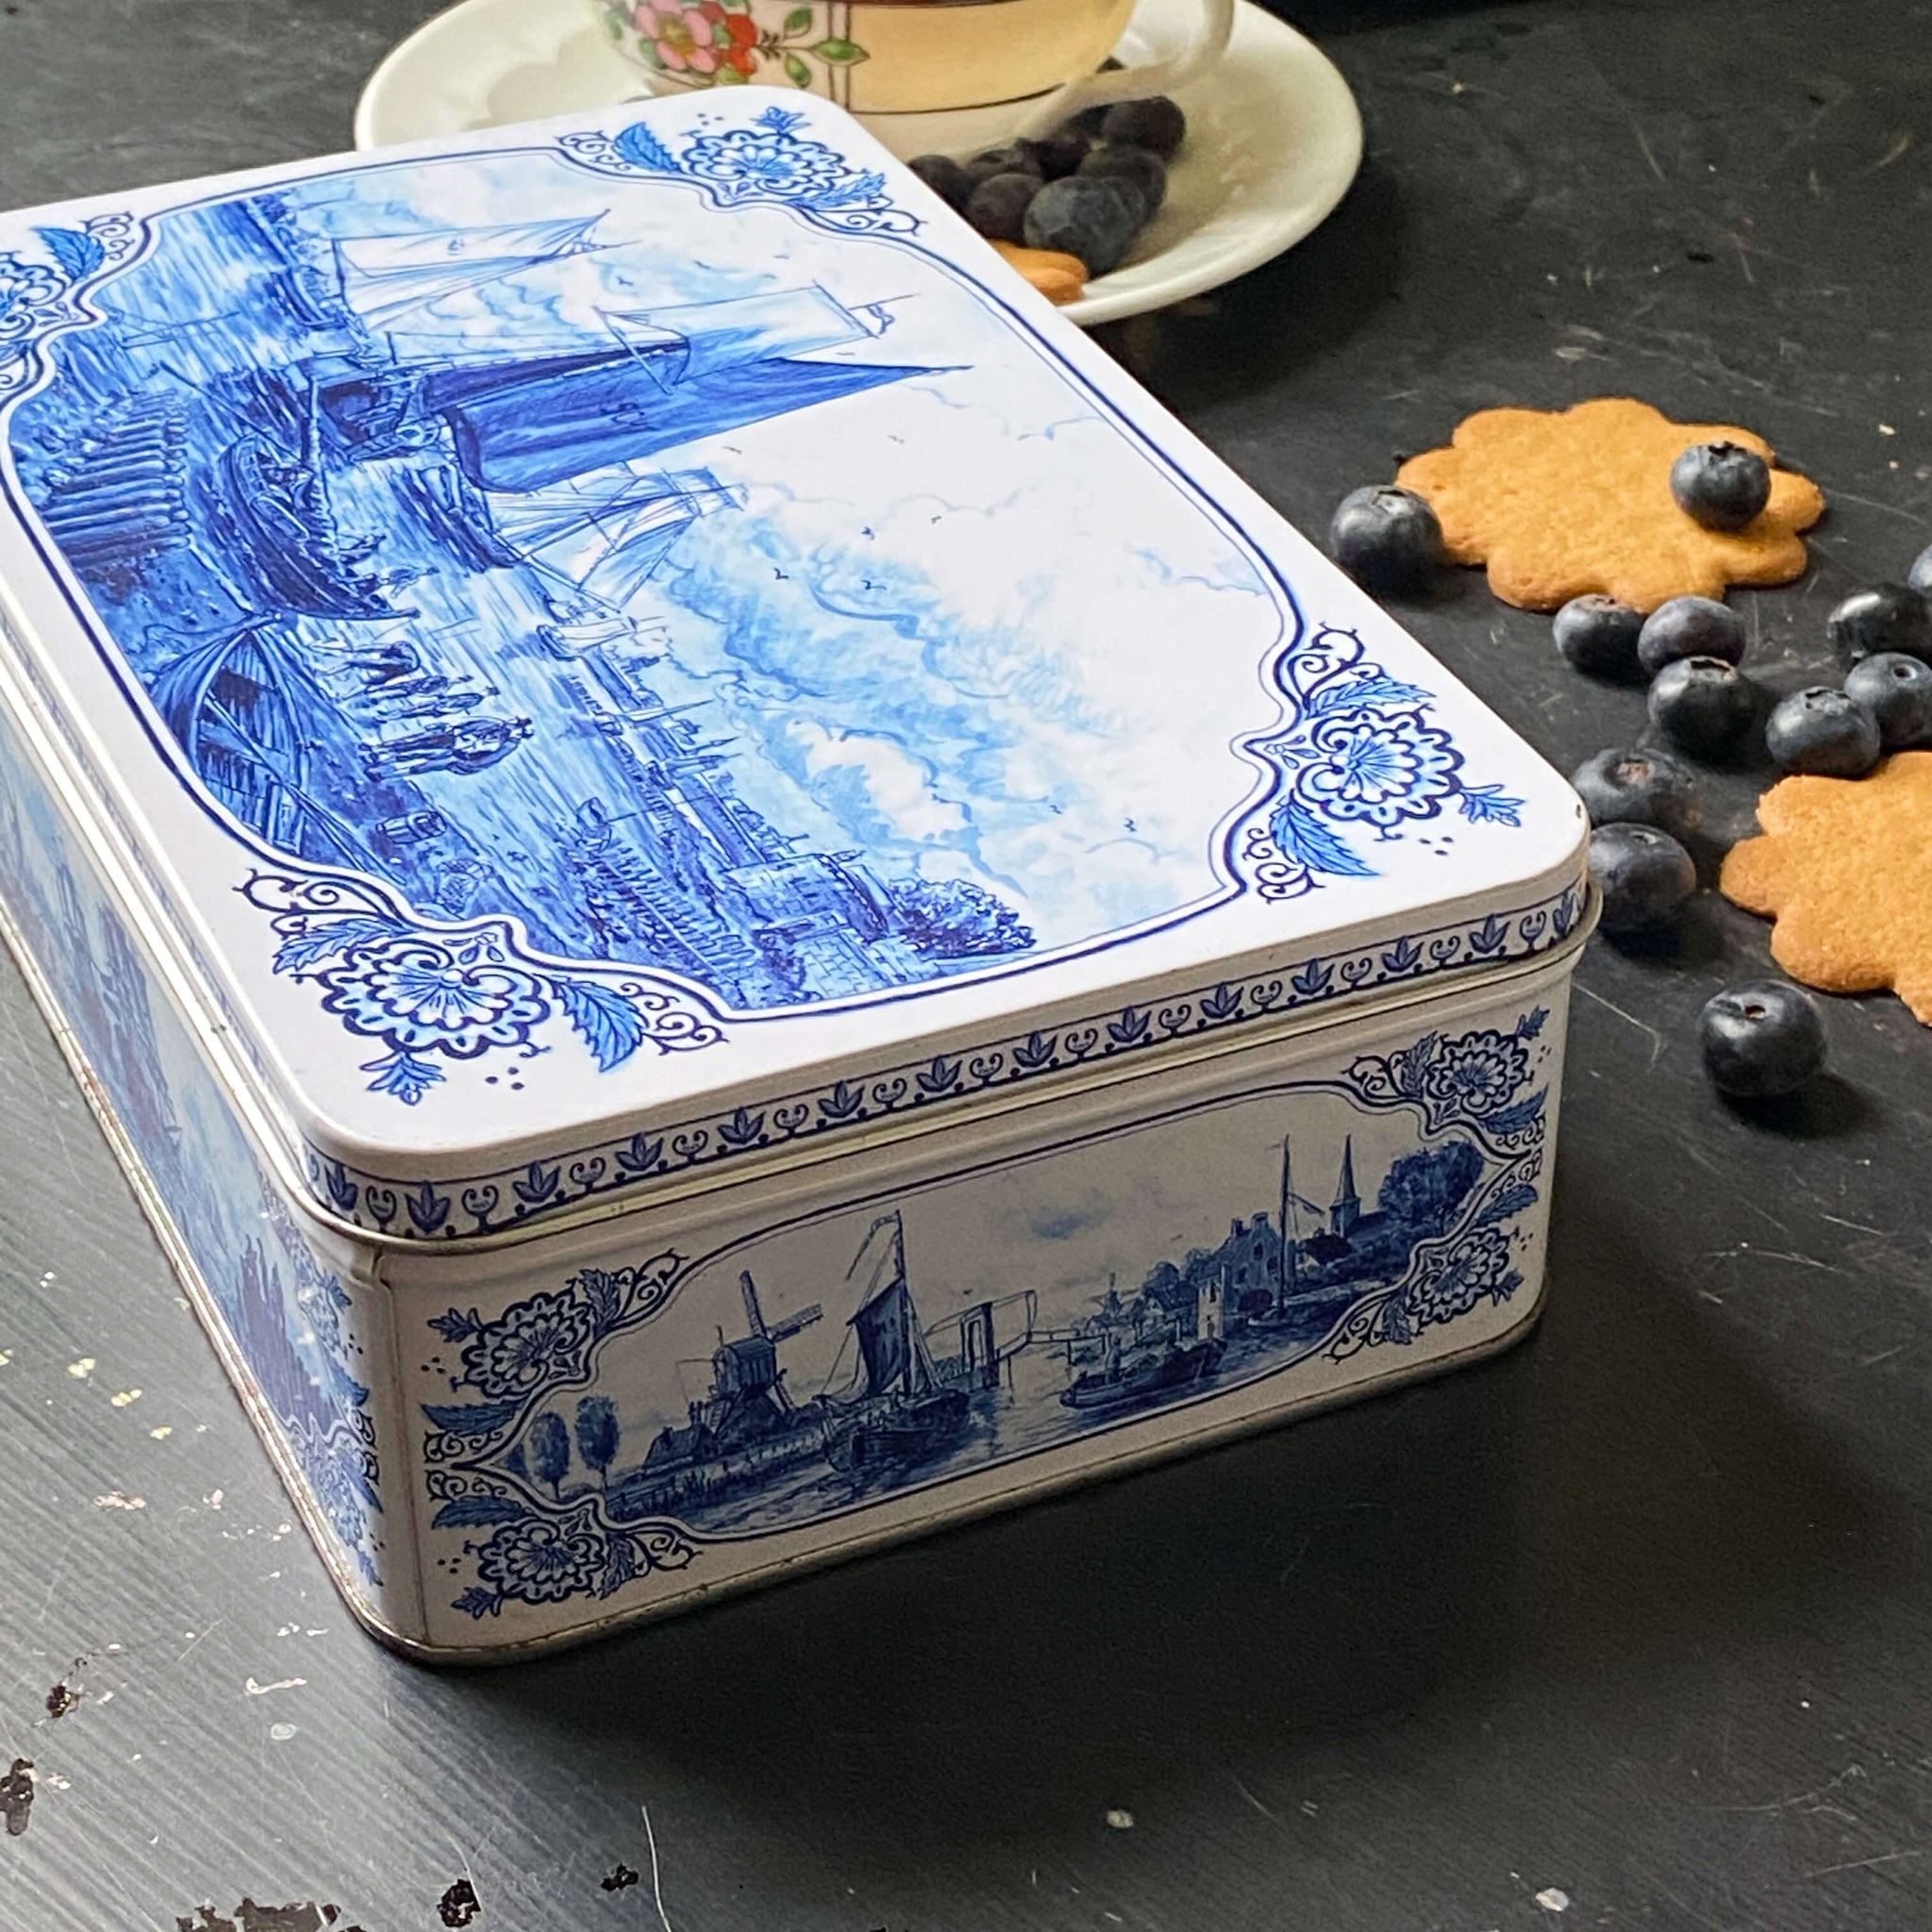 Vintage Blue and White Dutch Cookie Tin - Hellema Cookies circa 1980s-1990s